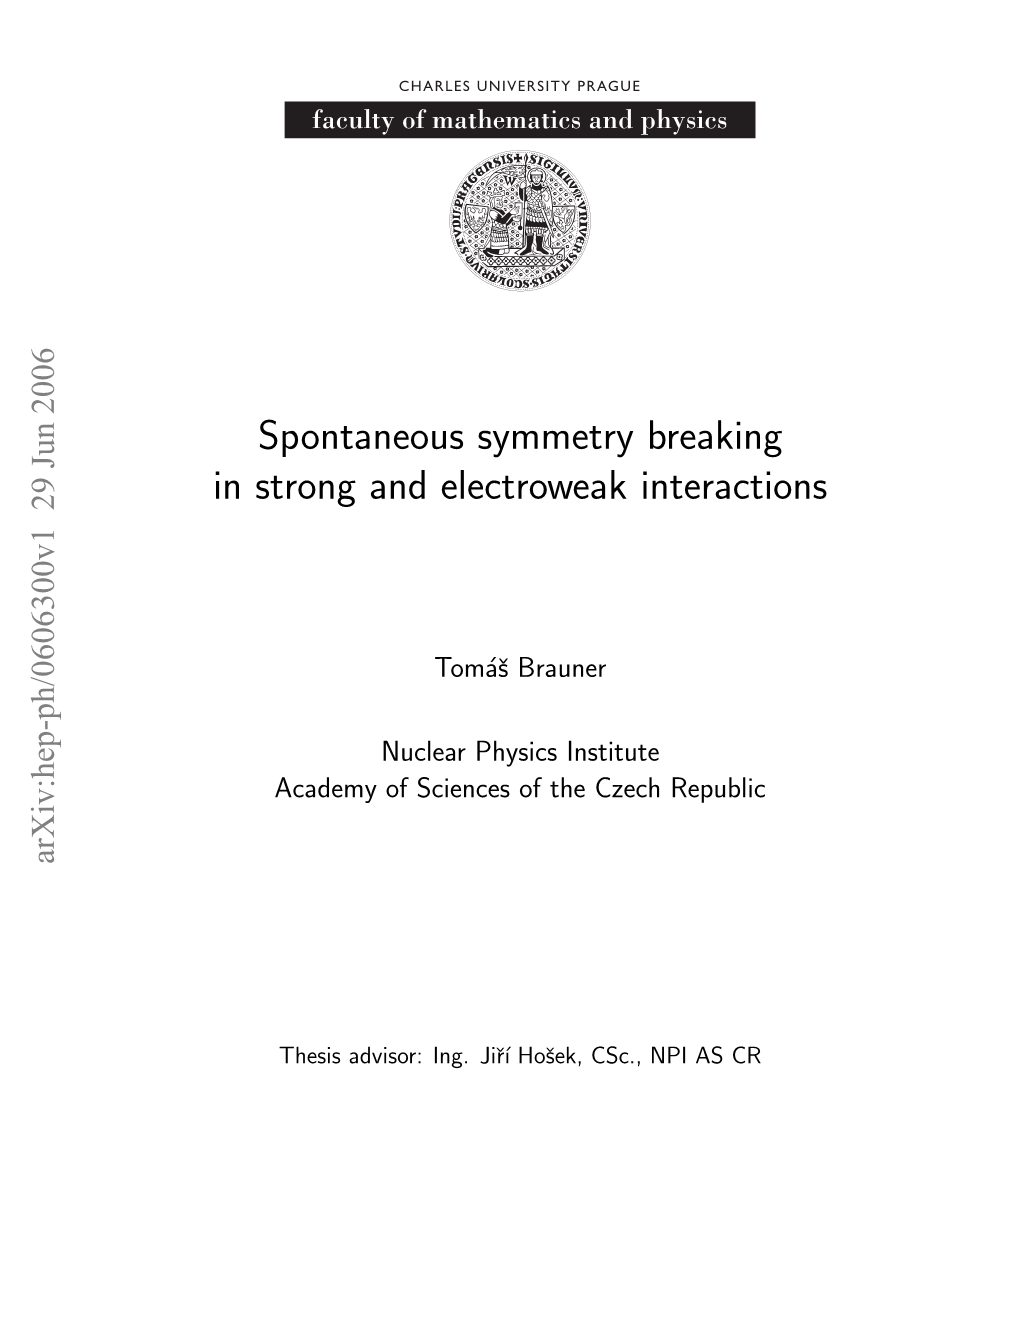 Spontaneous Symmetry Breaking in Strong and Electroweak Interactions